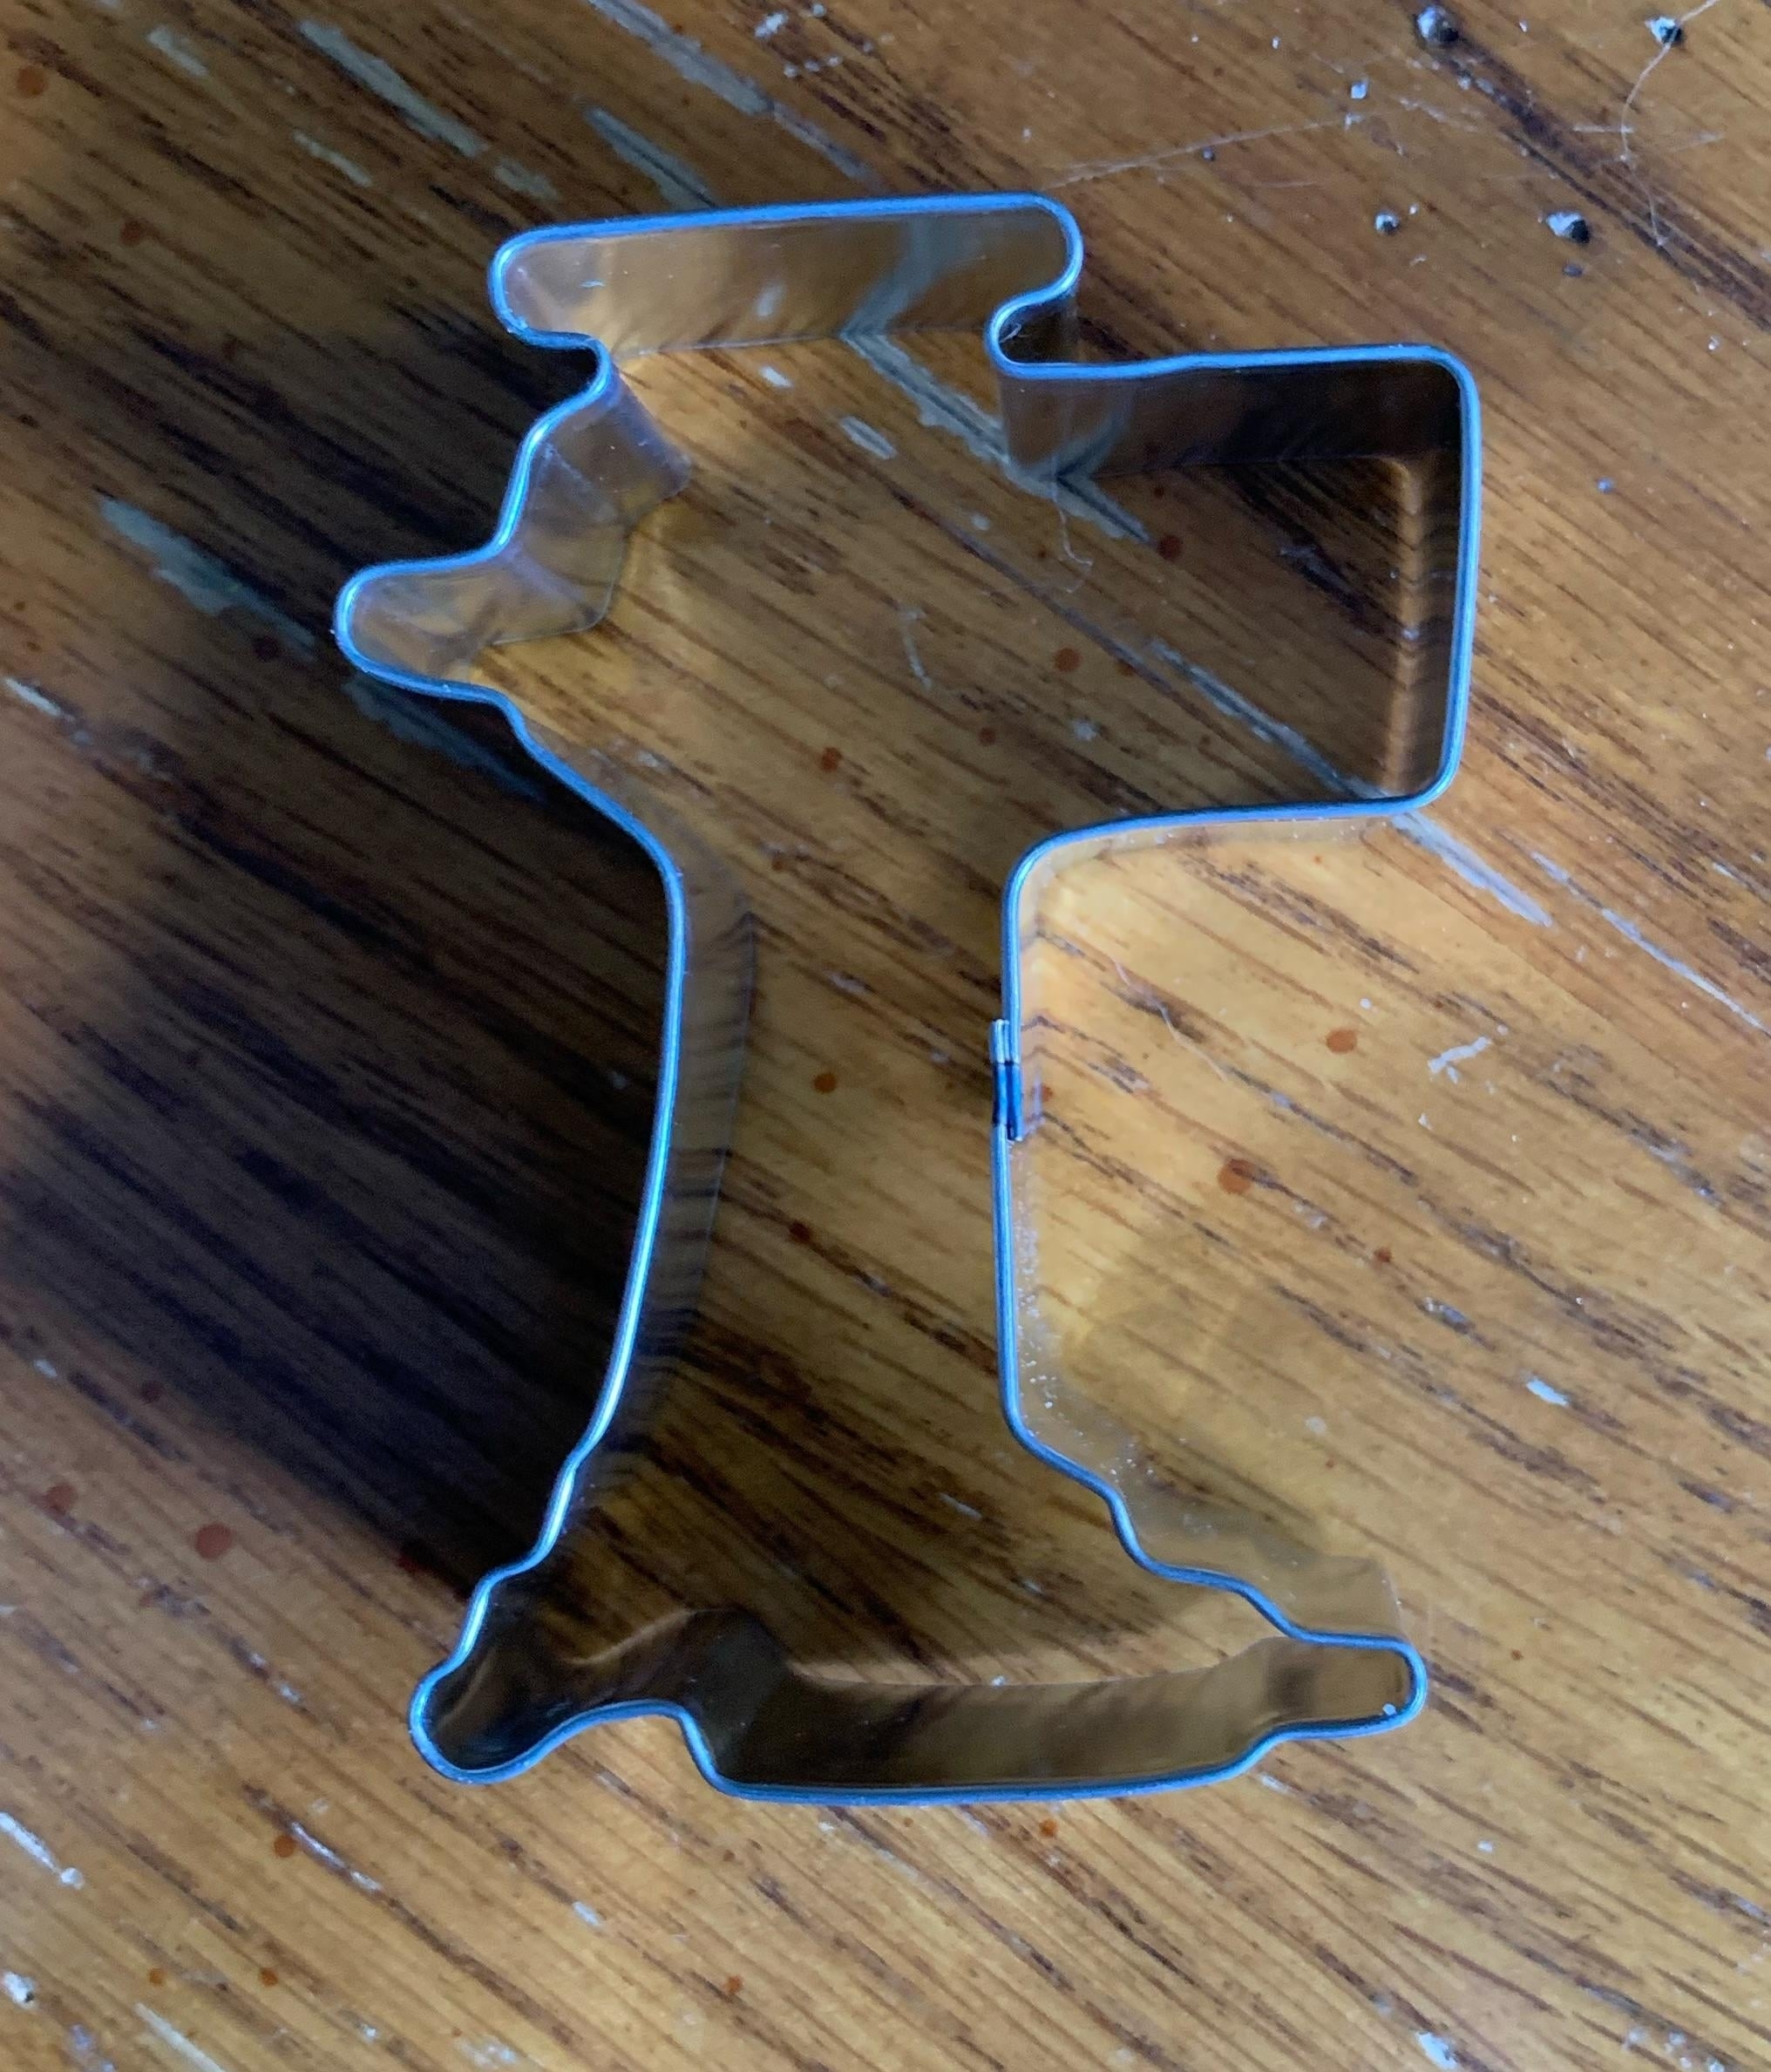 A cookie cutter that&#x27;s difficult to identify but could be an electric can opener